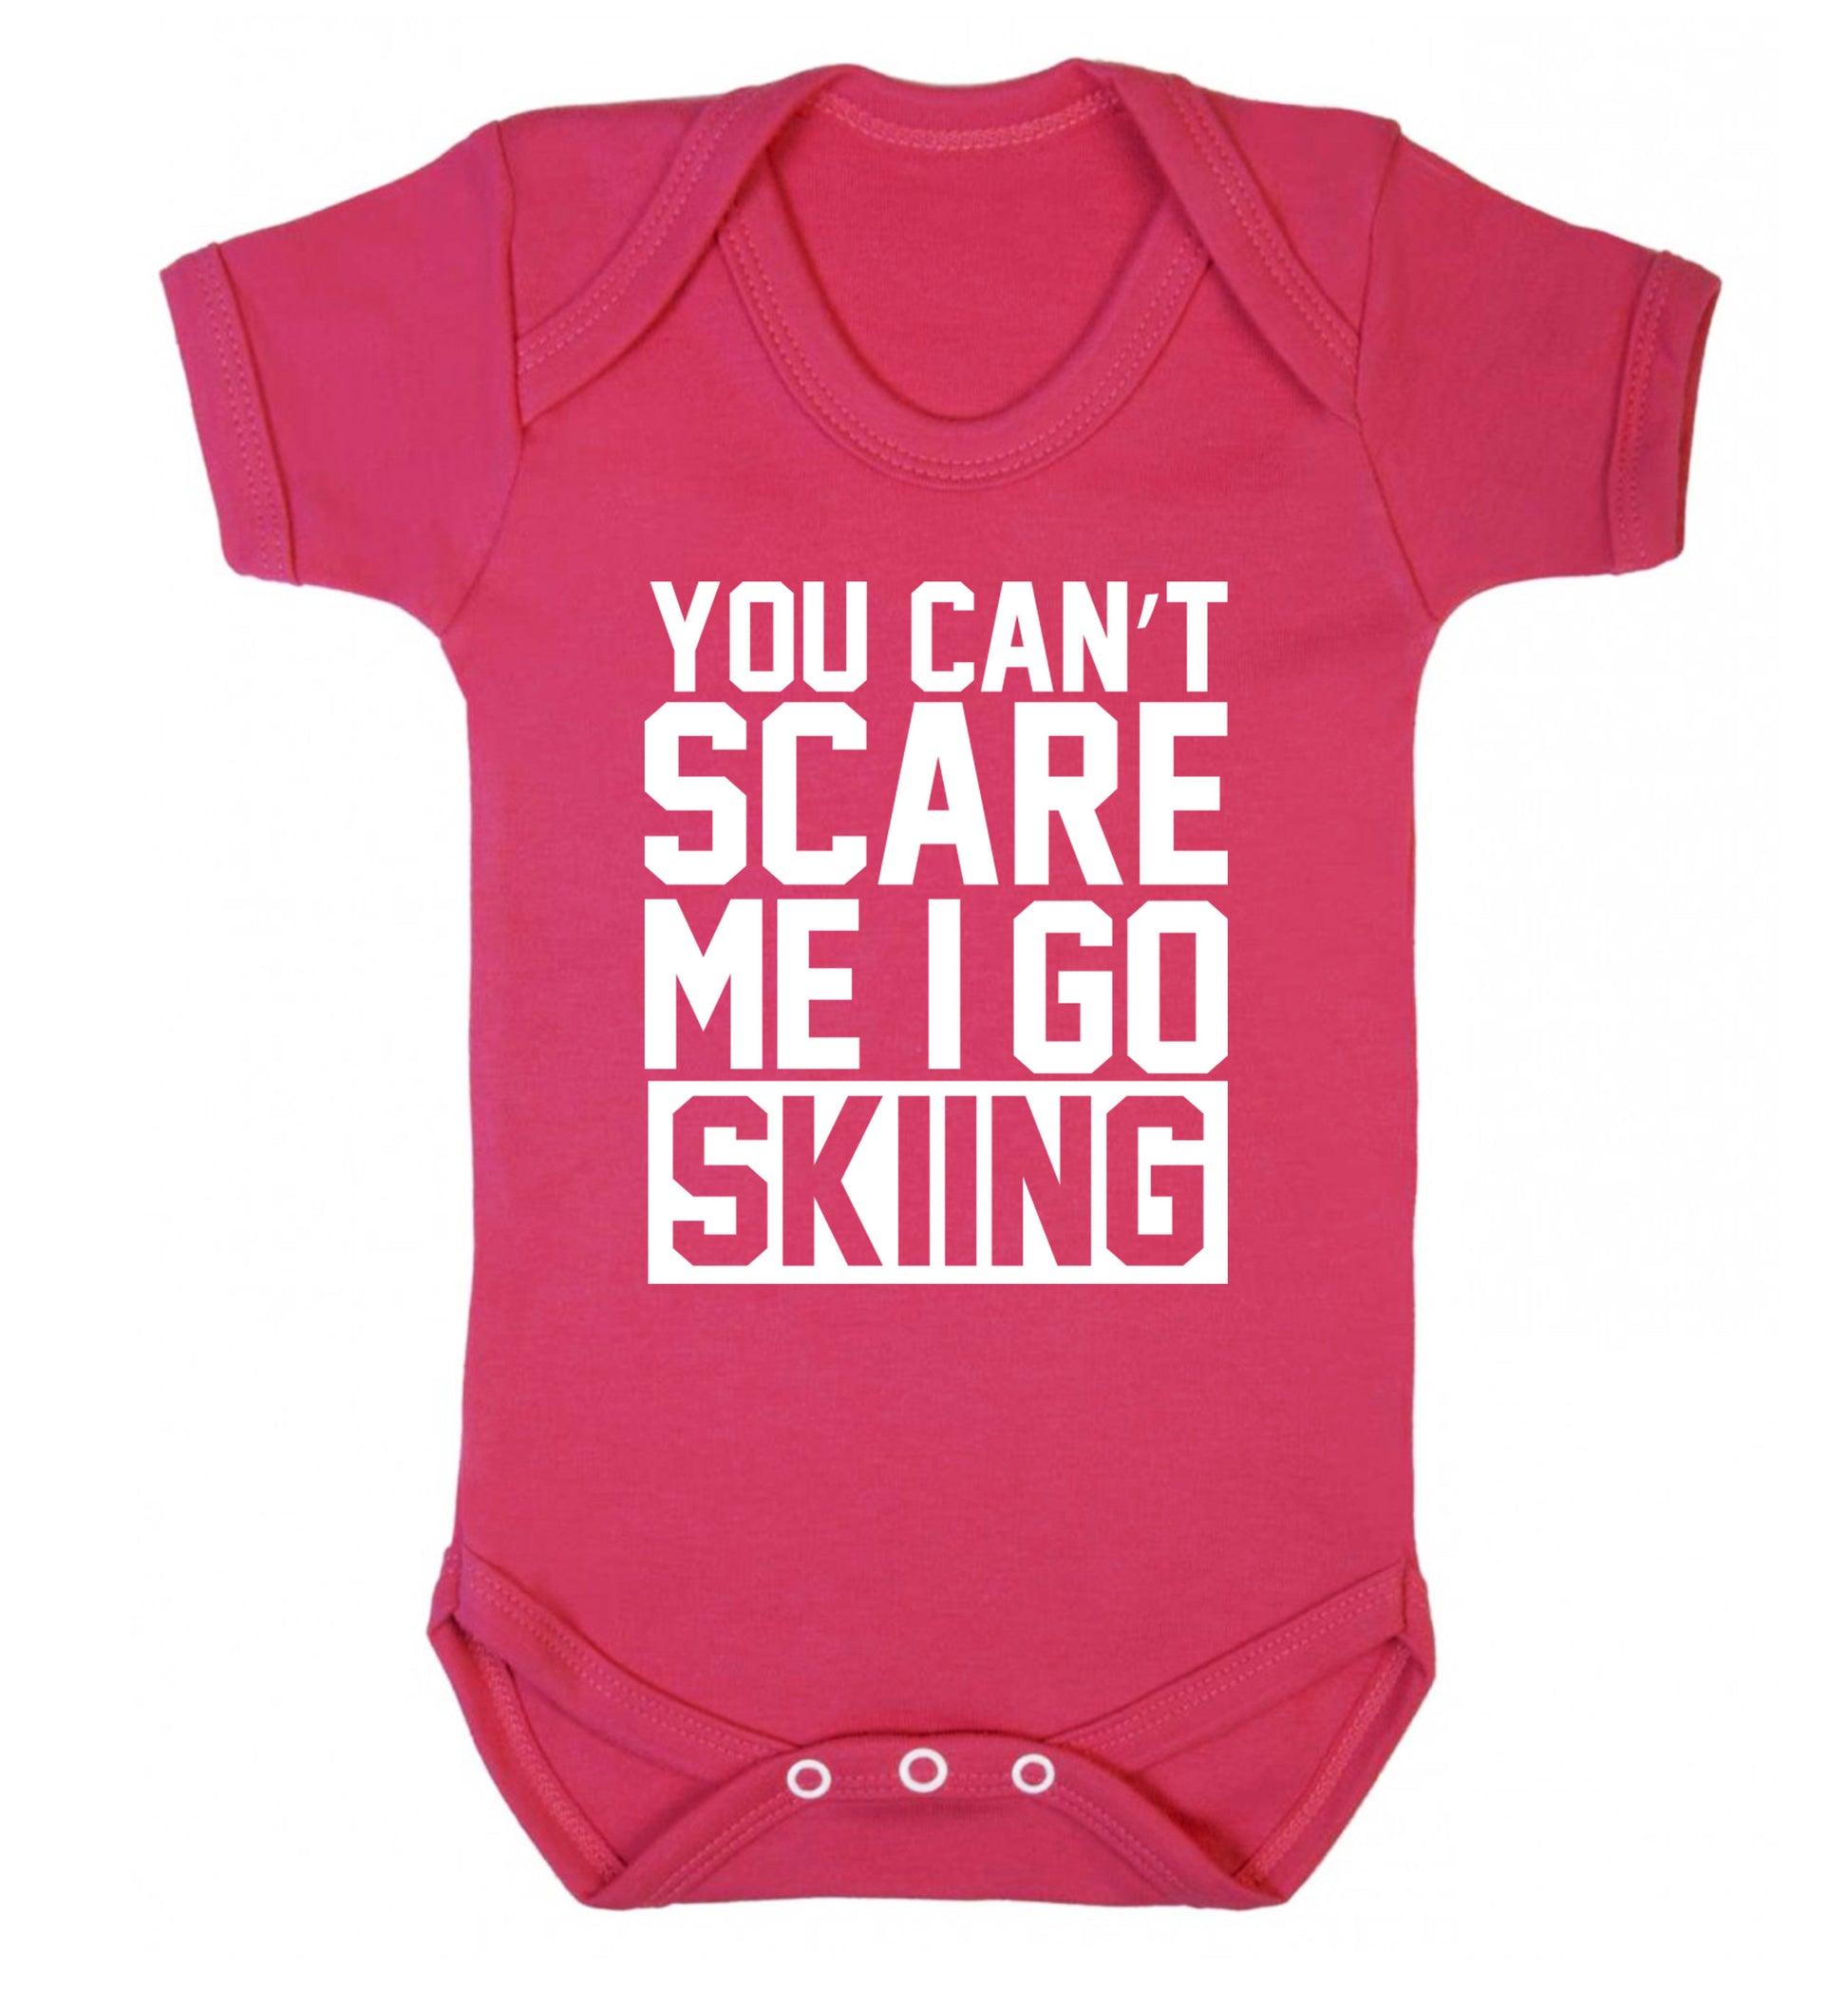 You can't scare me I go skiing Baby Vest dark pink 18-24 months